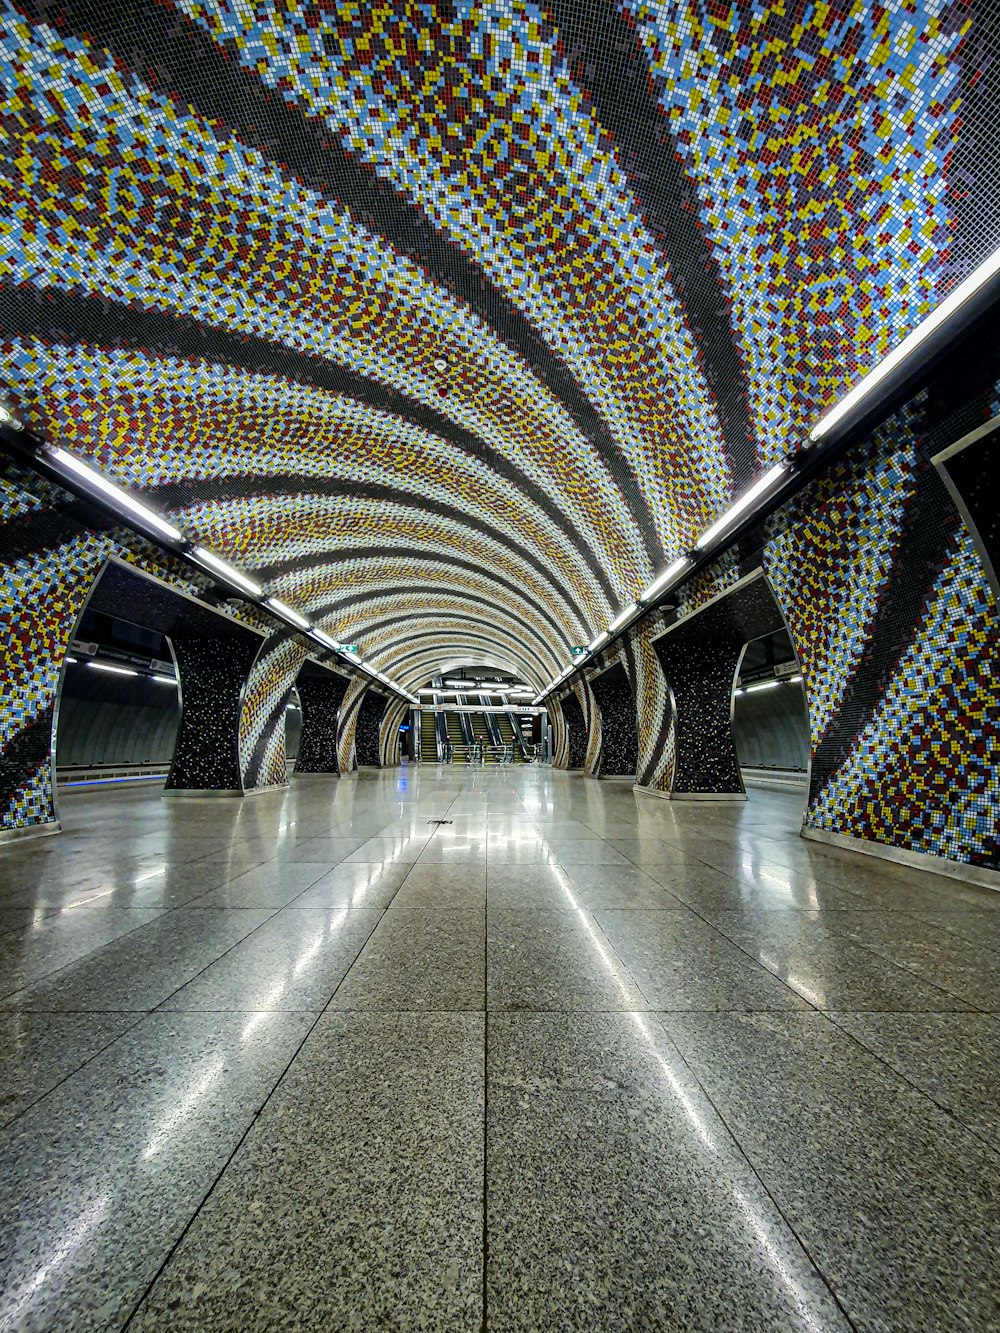 a subway station with a very colorful ceiling